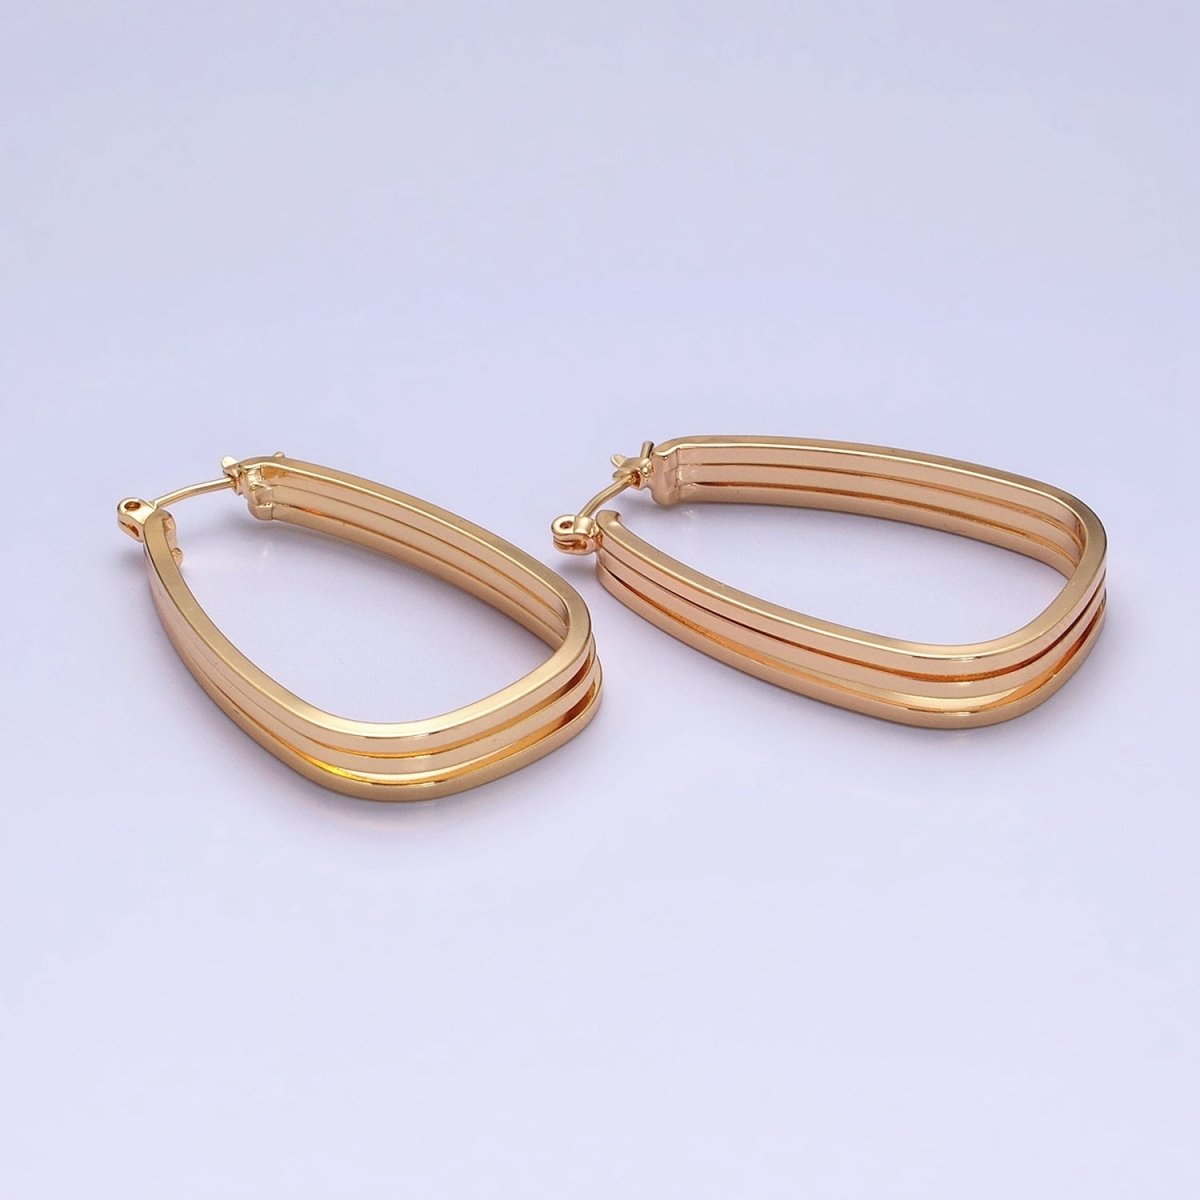 Statement Oval Hoop Earrings, Chunky Gold Hoop Earrings, Oval Gold Hoop Earrings, Modern Hoop Earrings AD1004 AD1005 - DLUXCA